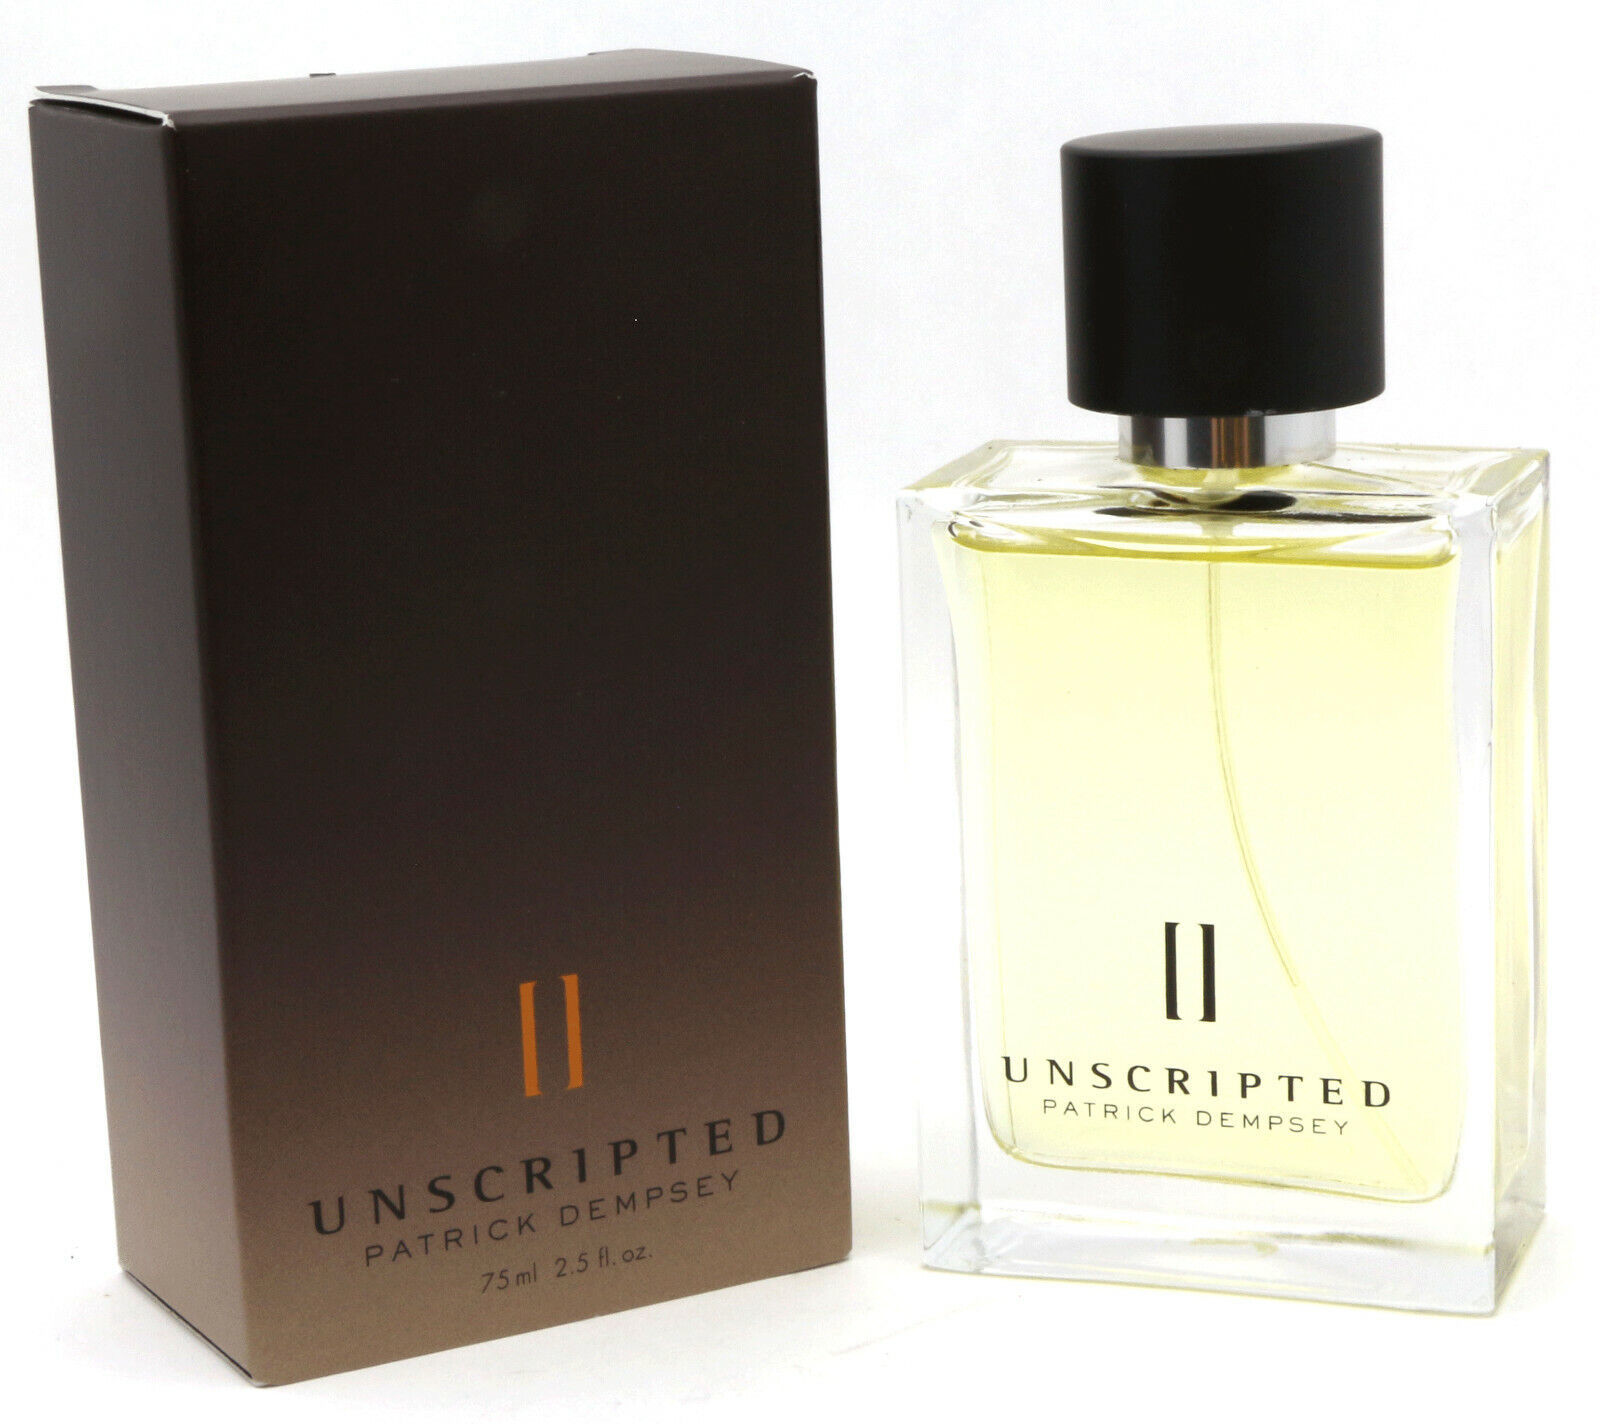 Avon Unscripted II By Patrick Dempsey EDT Spray 2.5 oz / 75 ml New in Sealed Box - $62.36